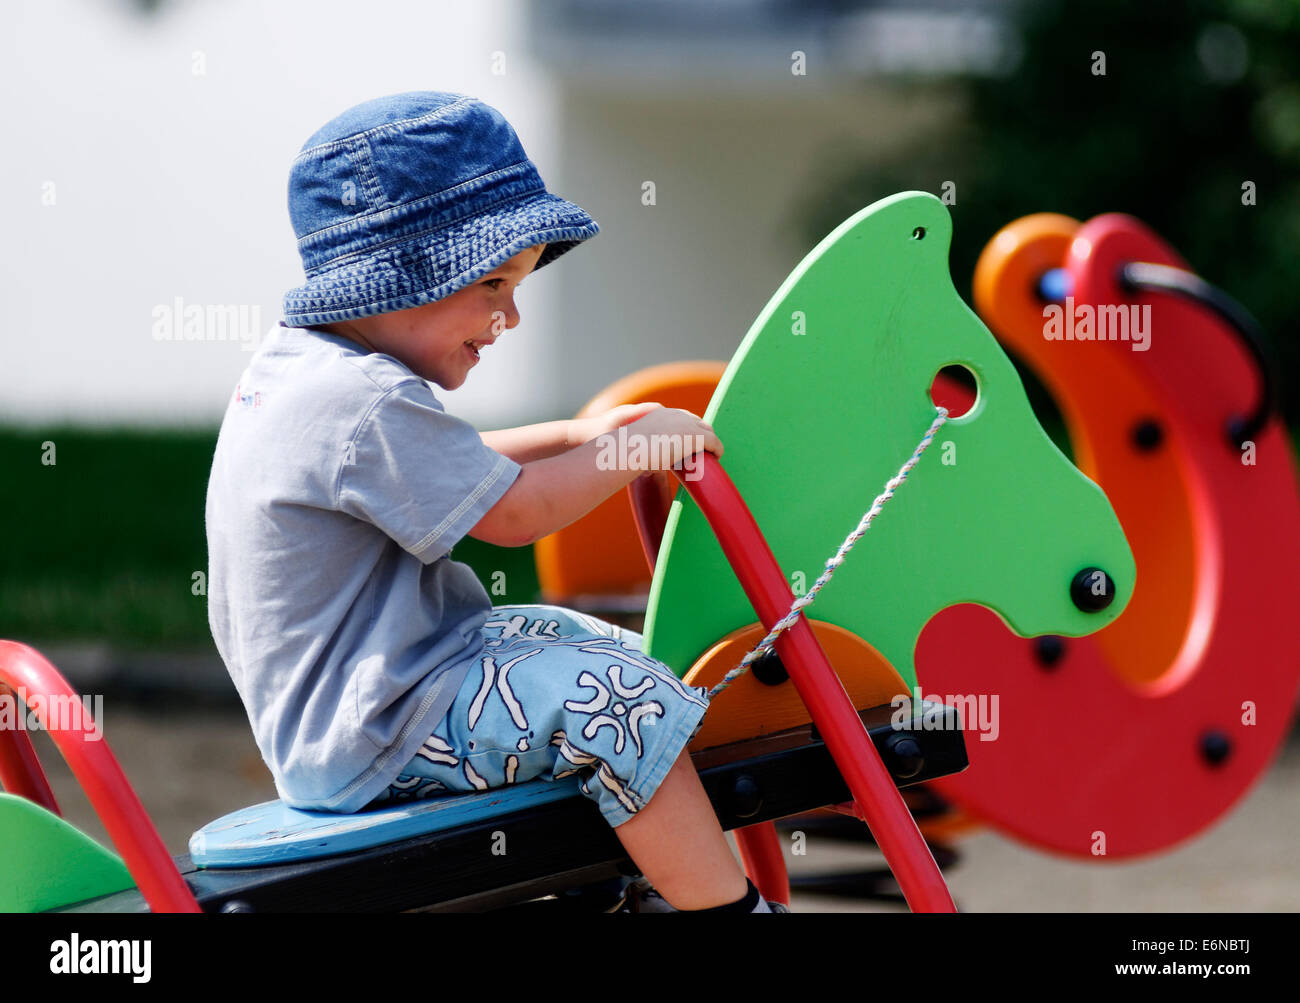 A smiling happy young boy playing in a playground Stock Photo